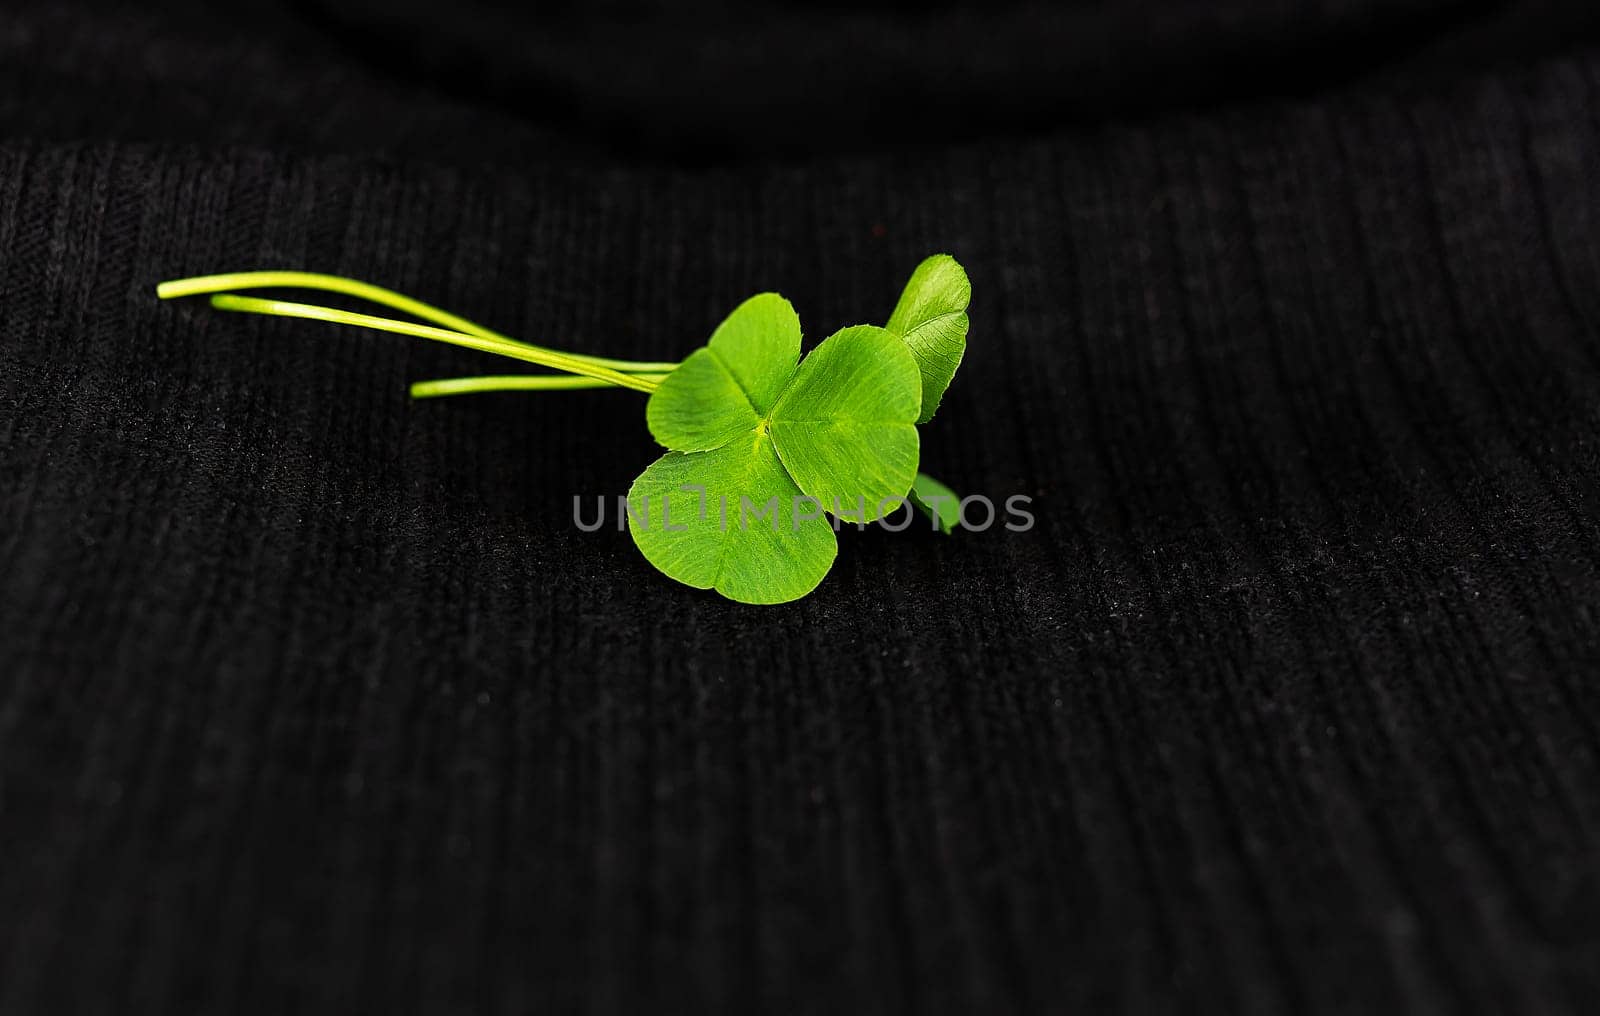 This image features a vibrant green four-leaf clover lying on a dark, textured surface. Clover symbolizes luck and good fortune